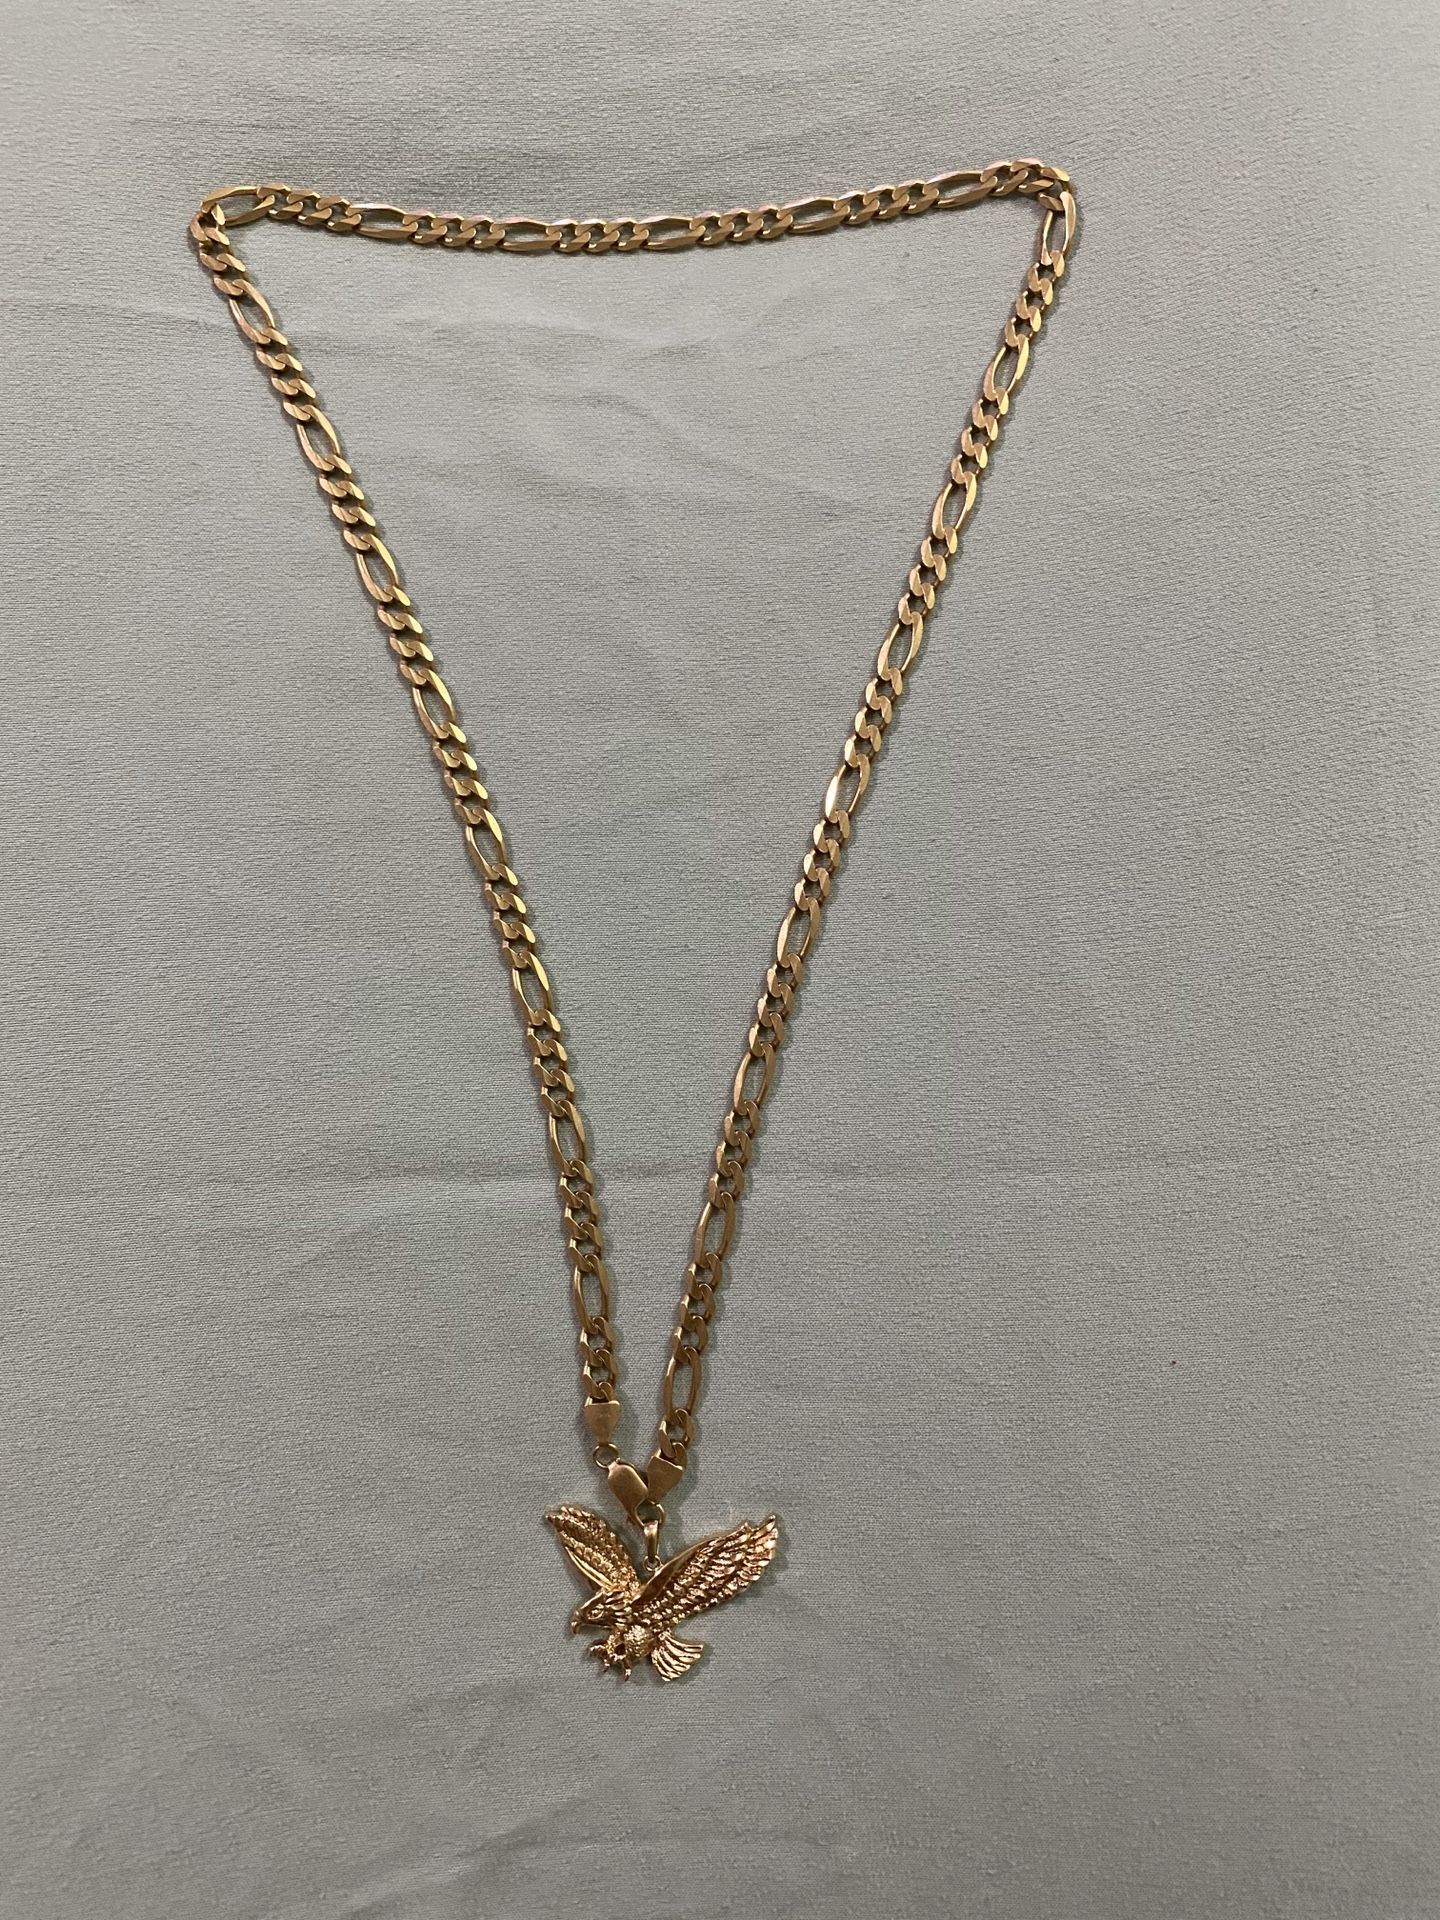 14K real gold chain with Eagle pendant